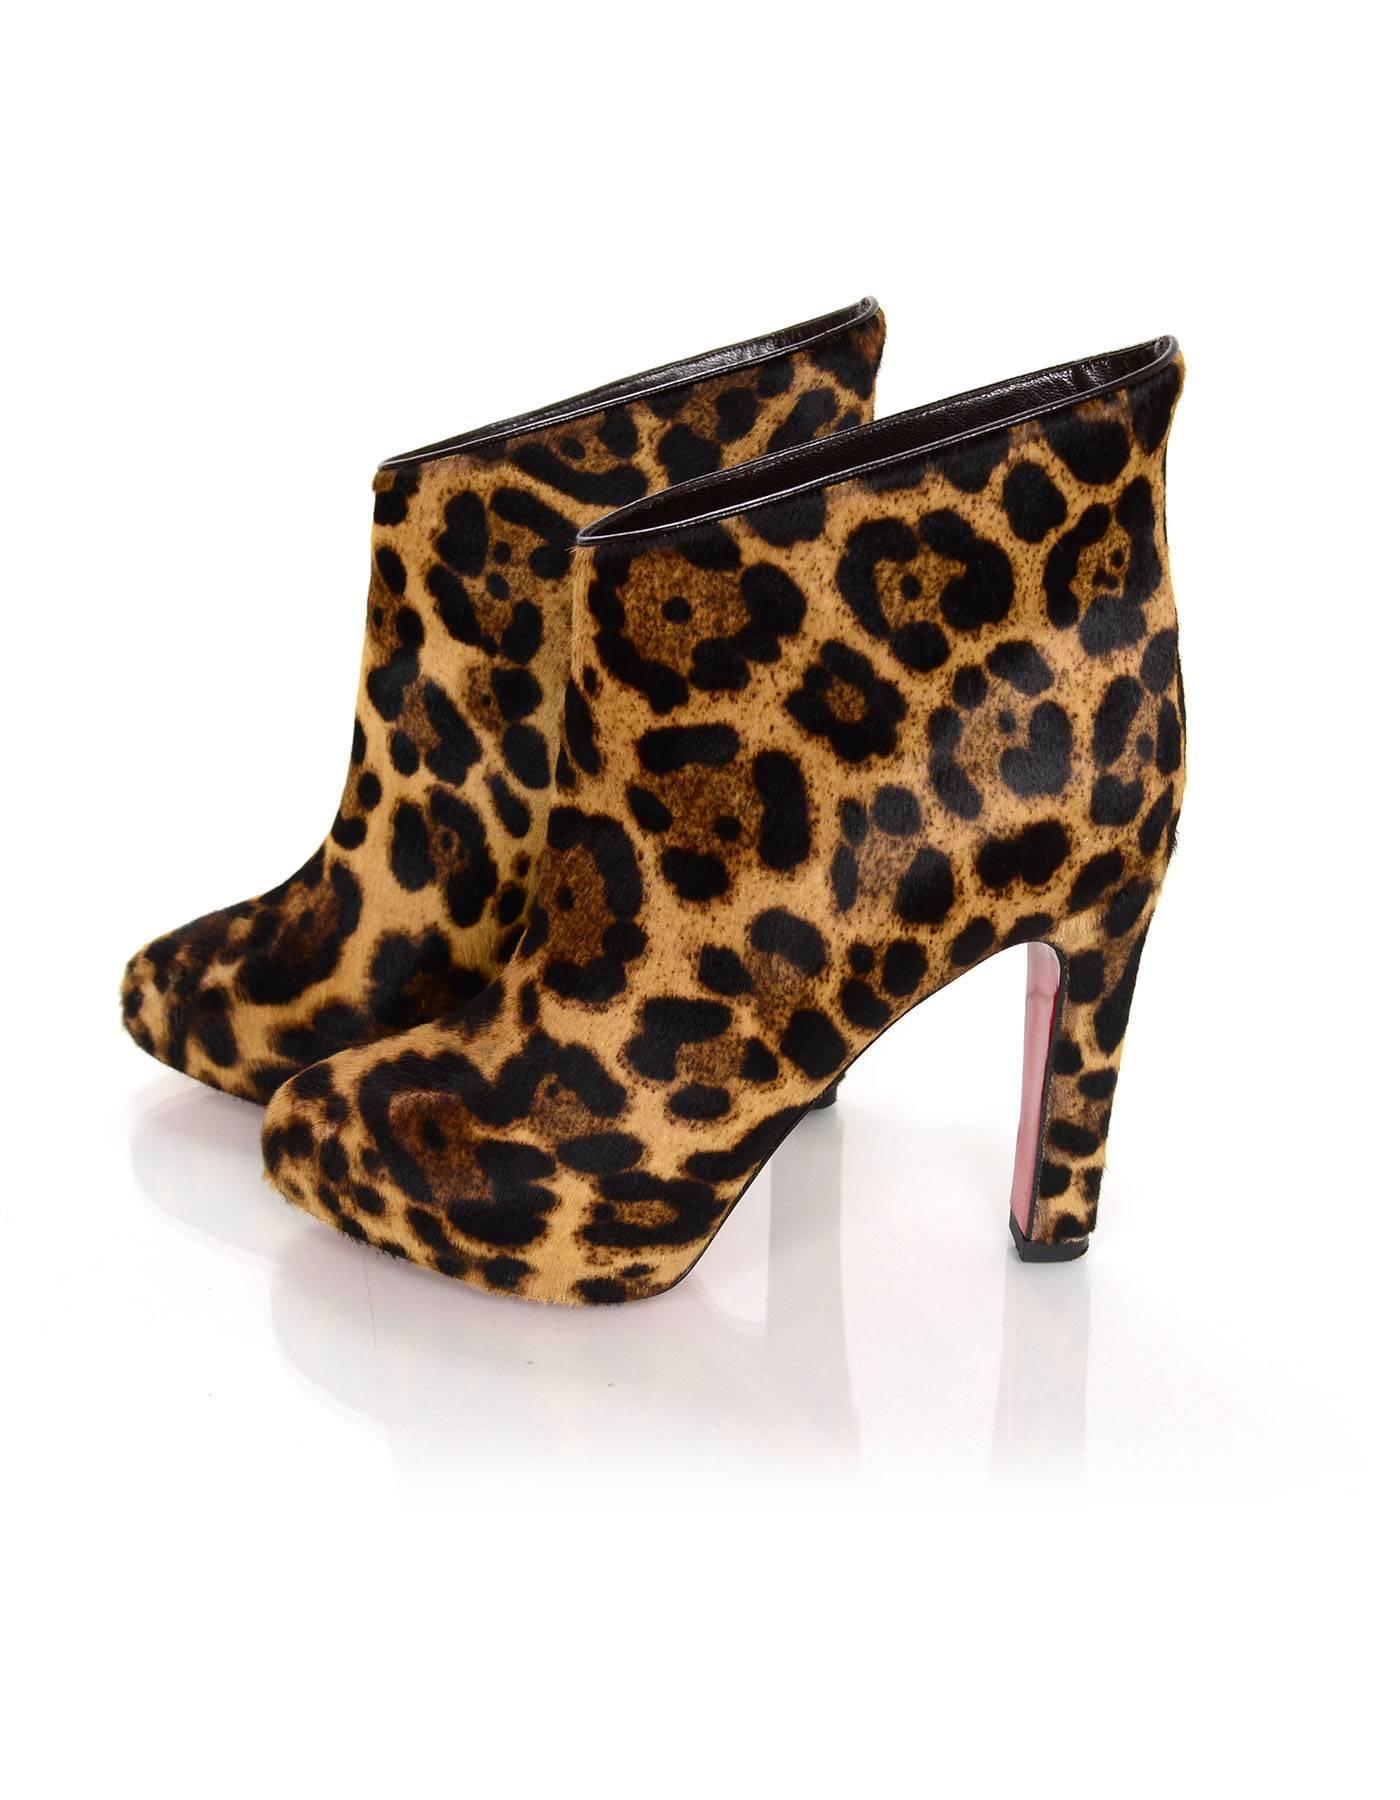 Christian Louboutin Leopard Print Calfskin KST 120 Ankle Booties 
Features hidden platform

Made In: Italy
Color: Black and tan
Materials: Calfskin (ponyhair)
Closure/Opening: Pull on
Sole Stamp: Christian Louboutin Made in Italy 37